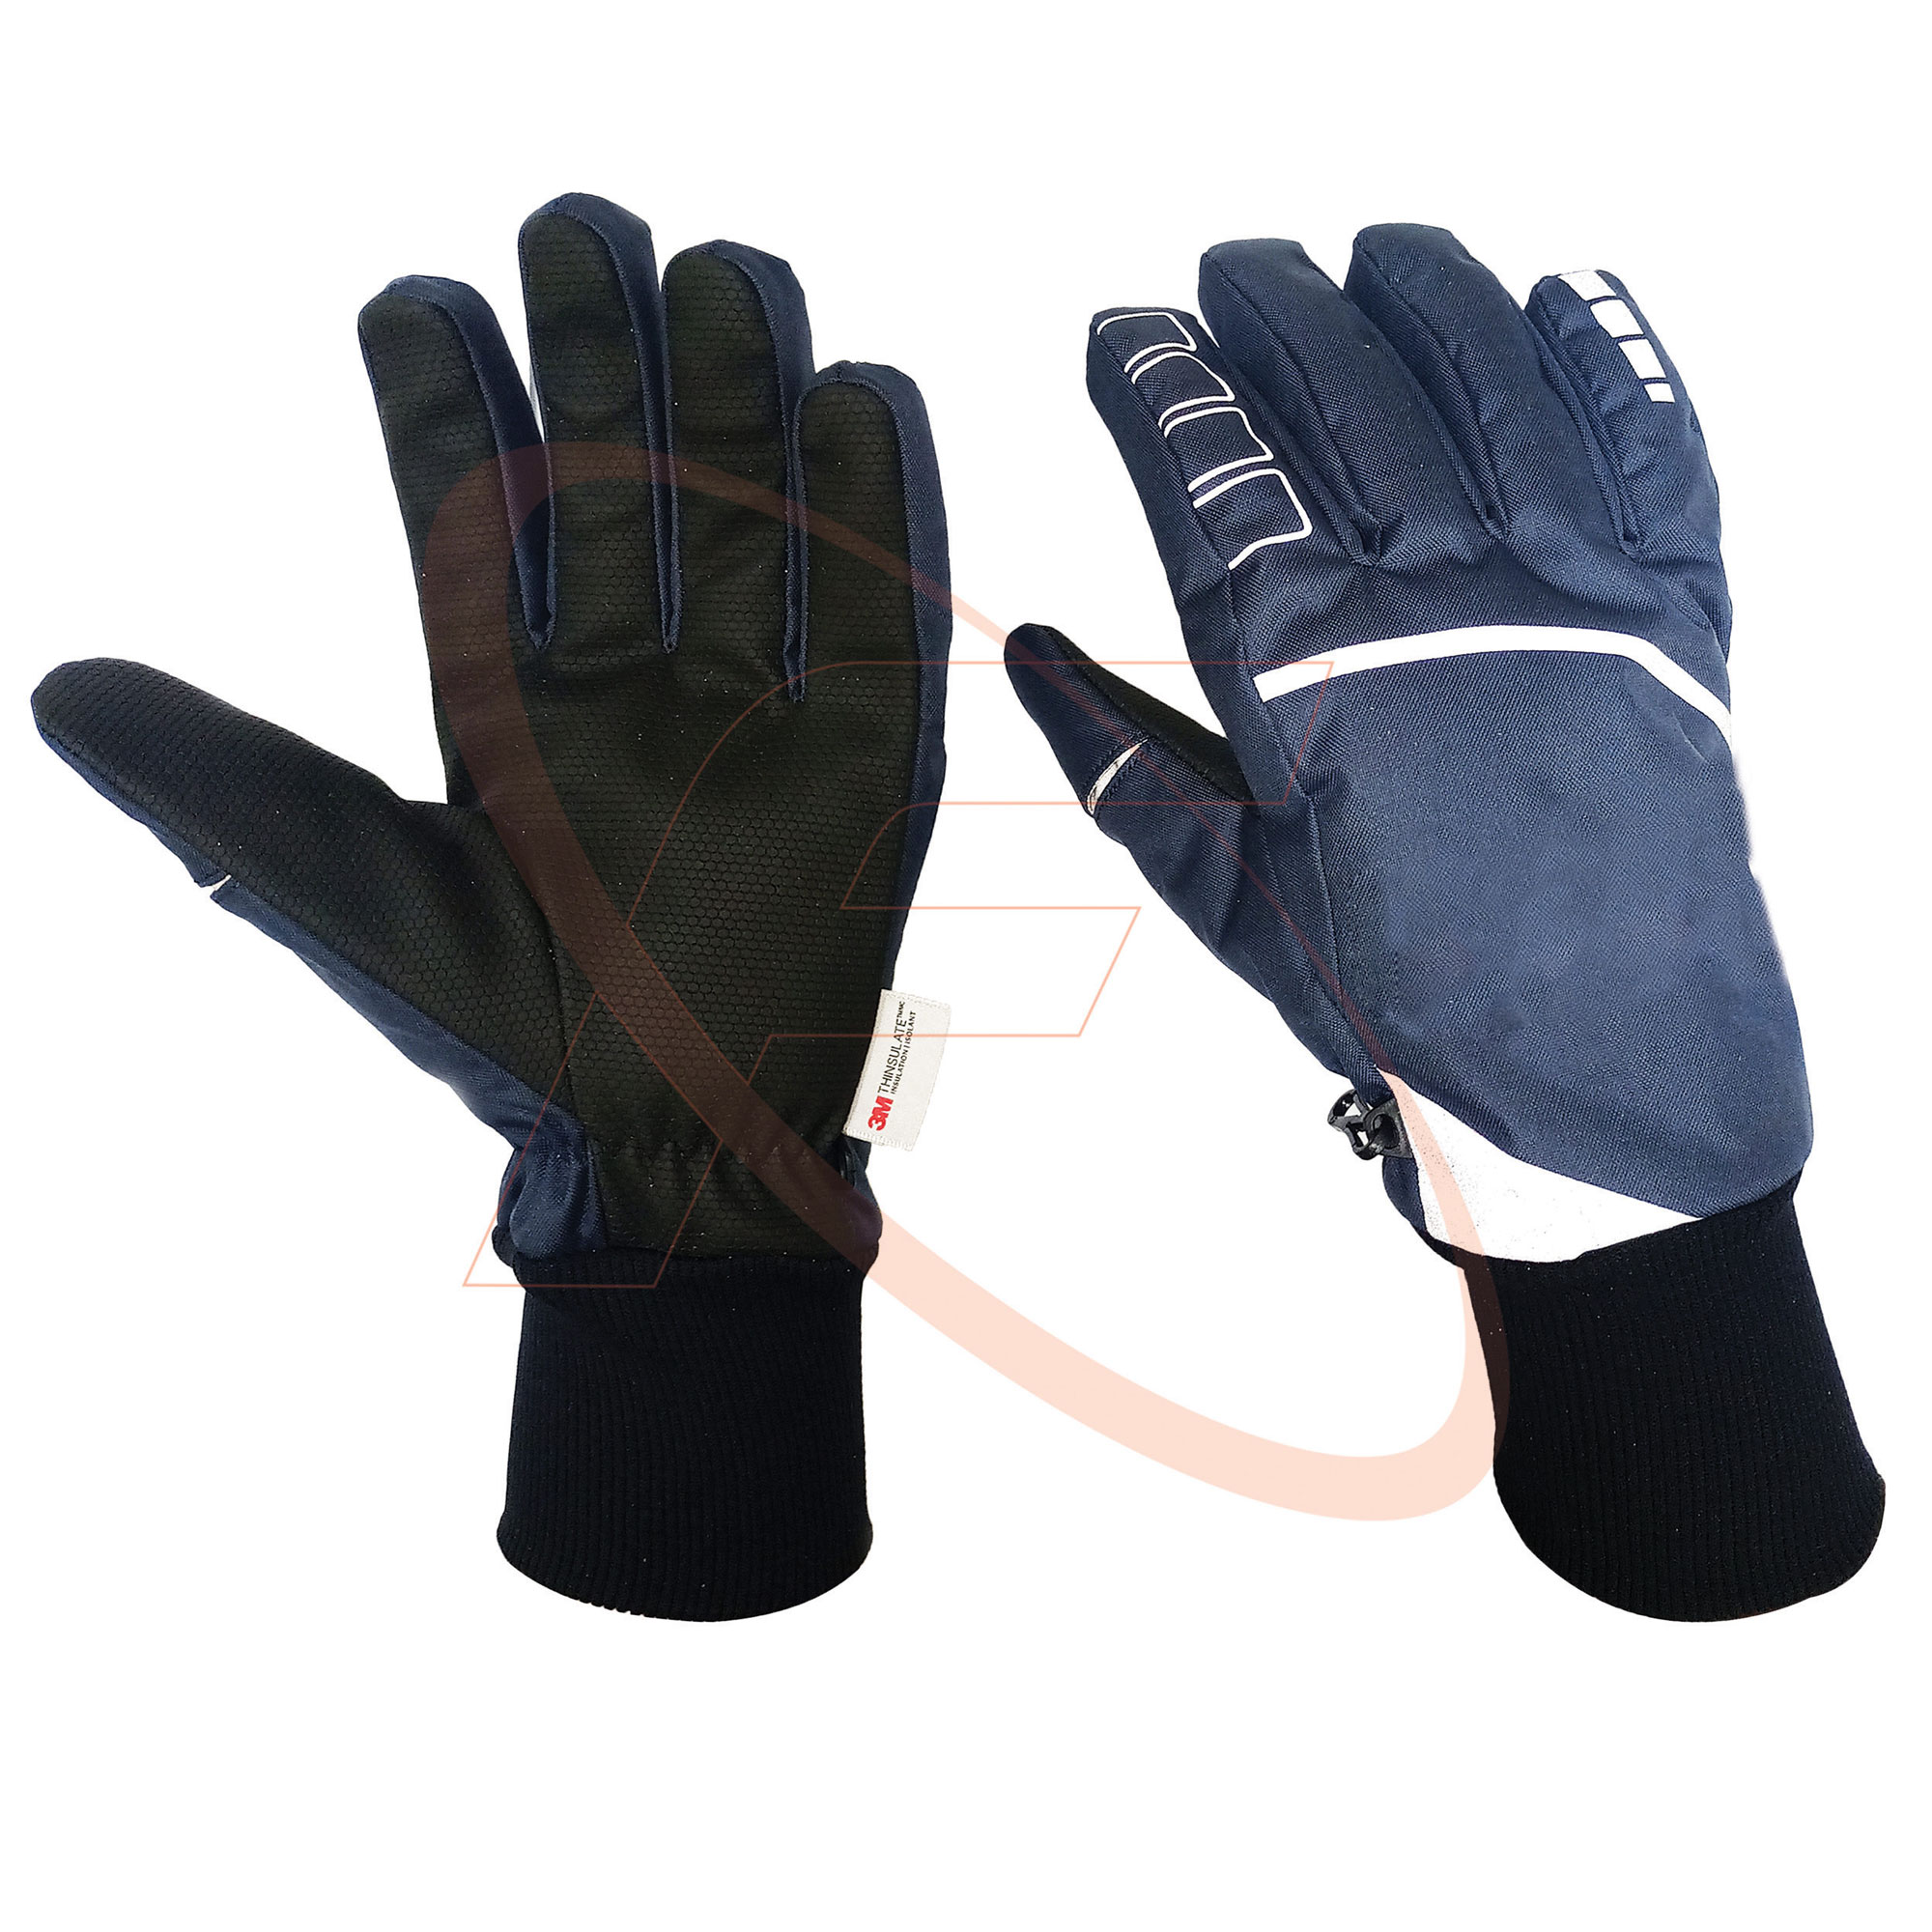 Dress Blue Winter Mechanic Gloves in Synthetic Leather with Silicon Print Palm Best Weather Resistant Winter Gloves